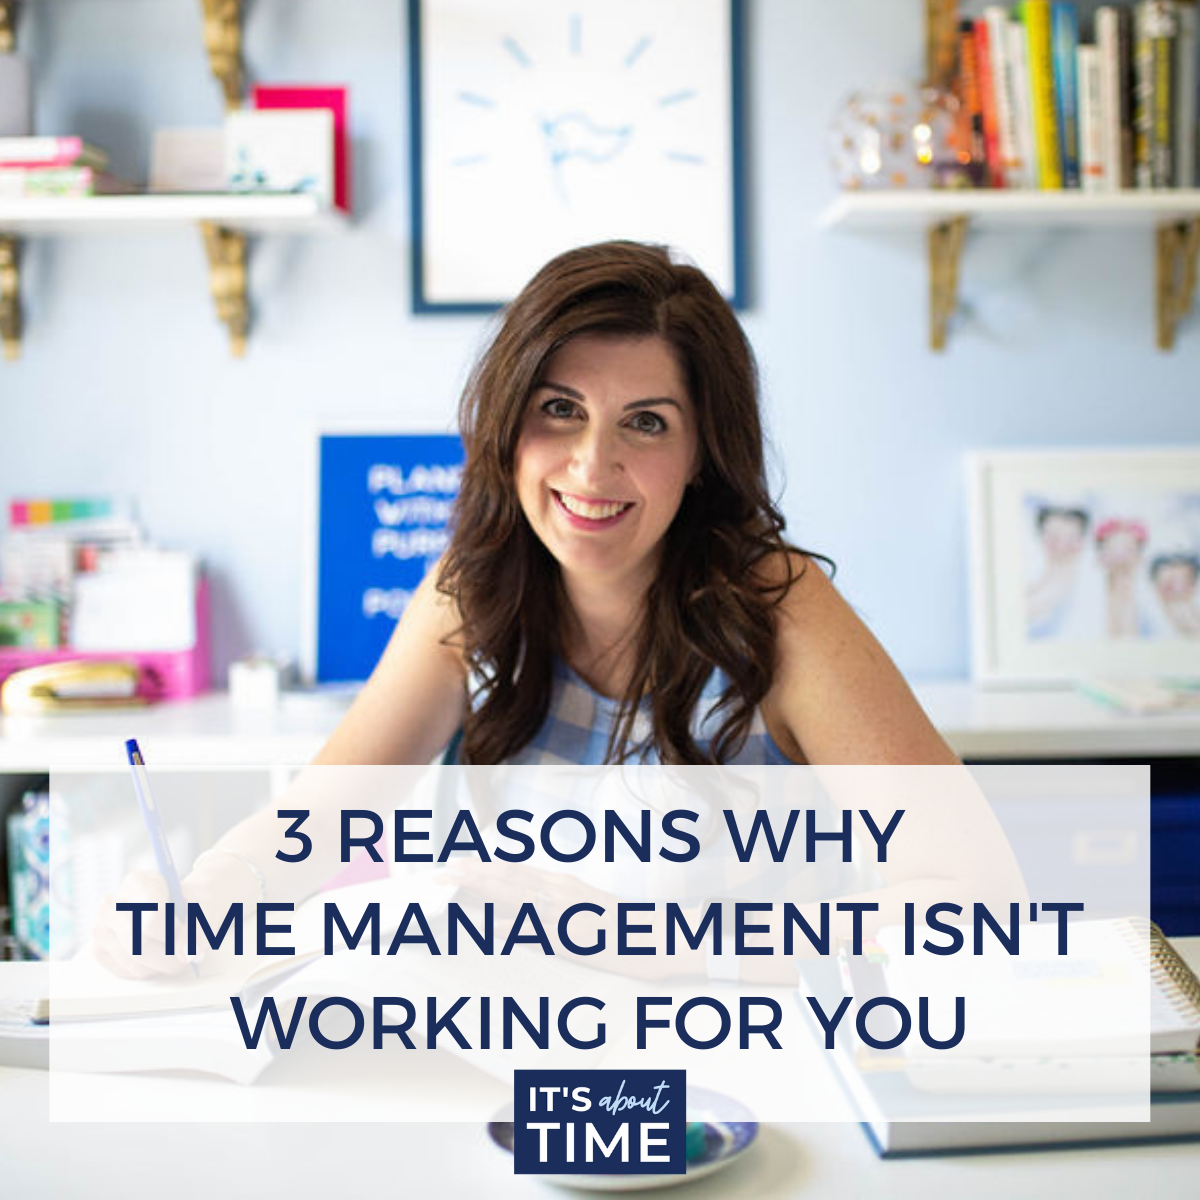 3 Reasons Why Time Management Isn't Working For You | It's About Time Podcast